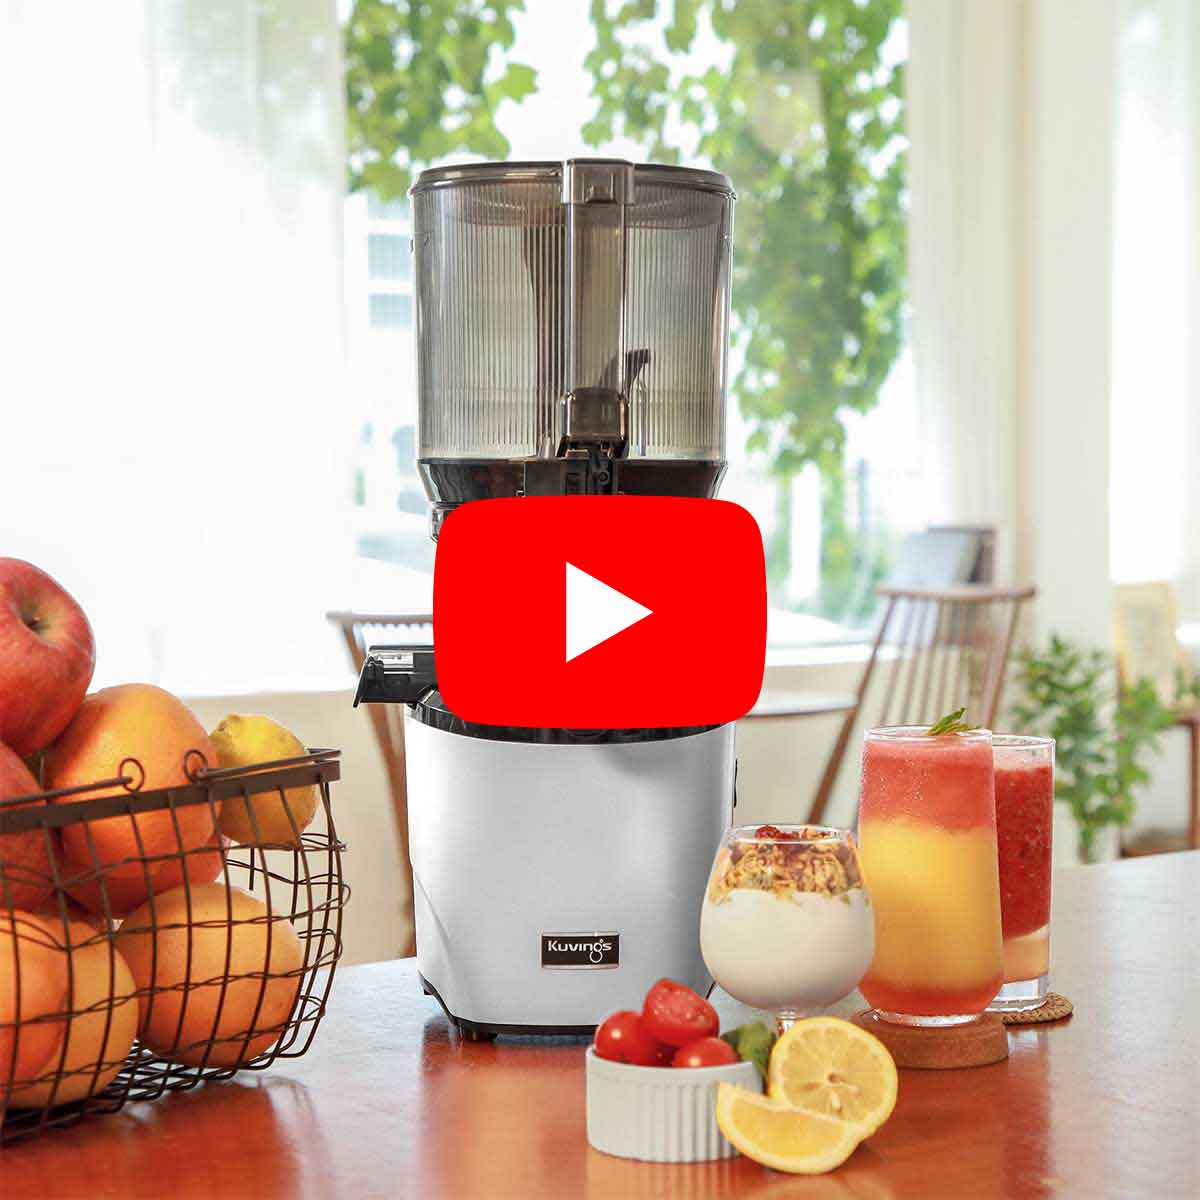 Kuvings AUTO10 Hands-Free Slow Juicer – Light Silver (FOTO Video)